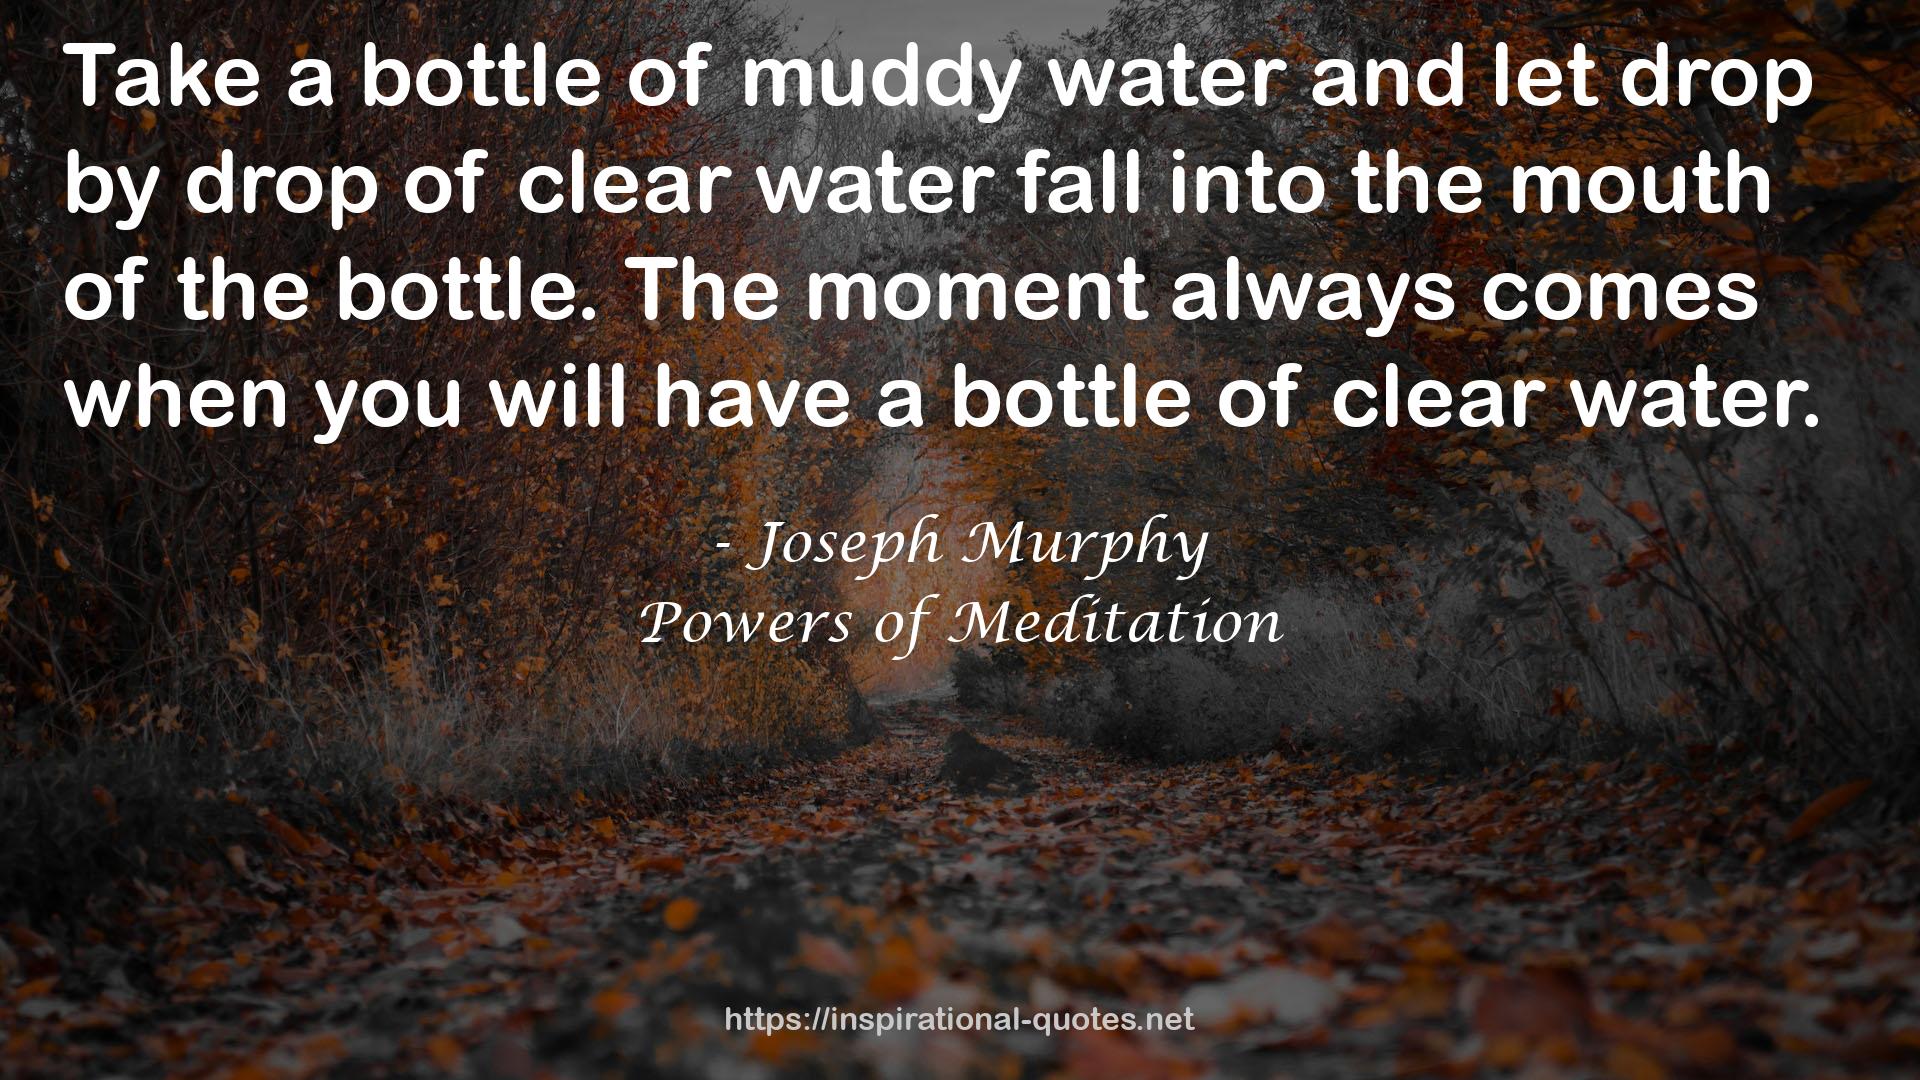 Powers of Meditation QUOTES